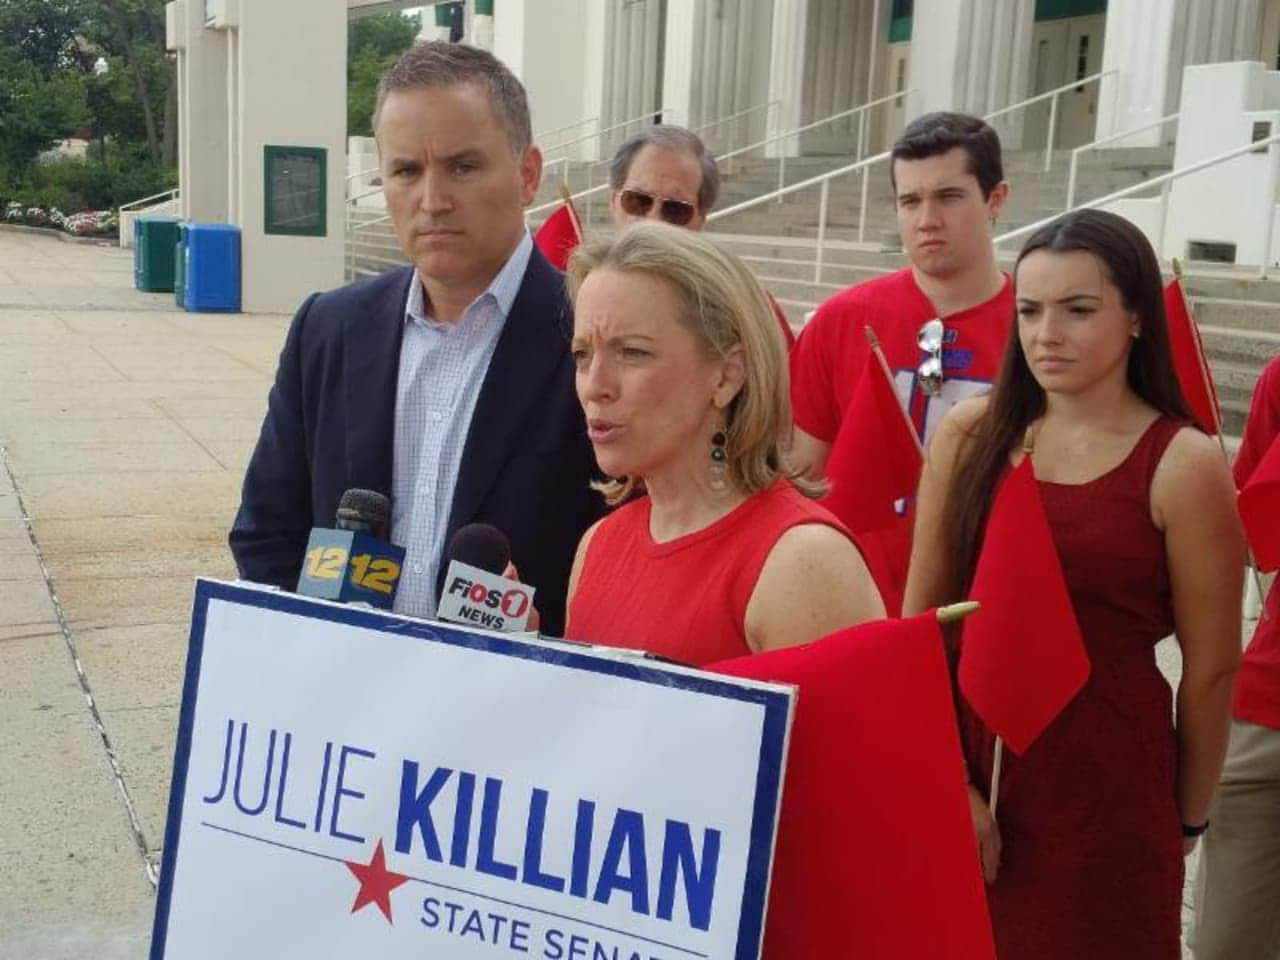 Julie Killian wants to re-appropriate state funding to combat youth drug use in Westchester County.